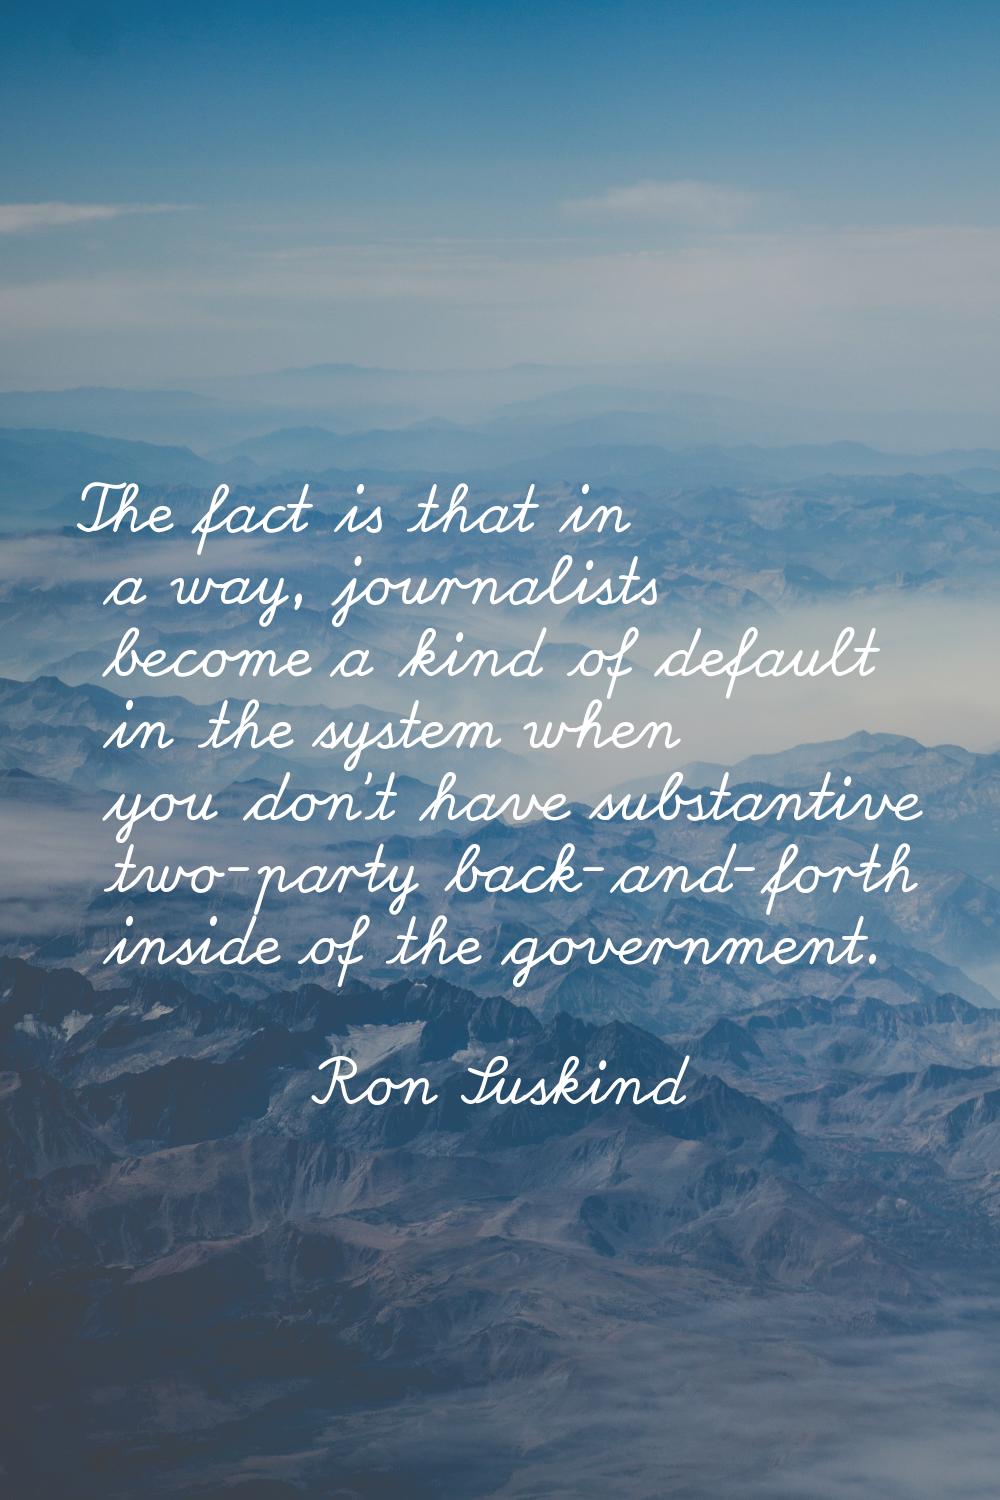 The fact is that in a way, journalists become a kind of default in the system when you don't have s